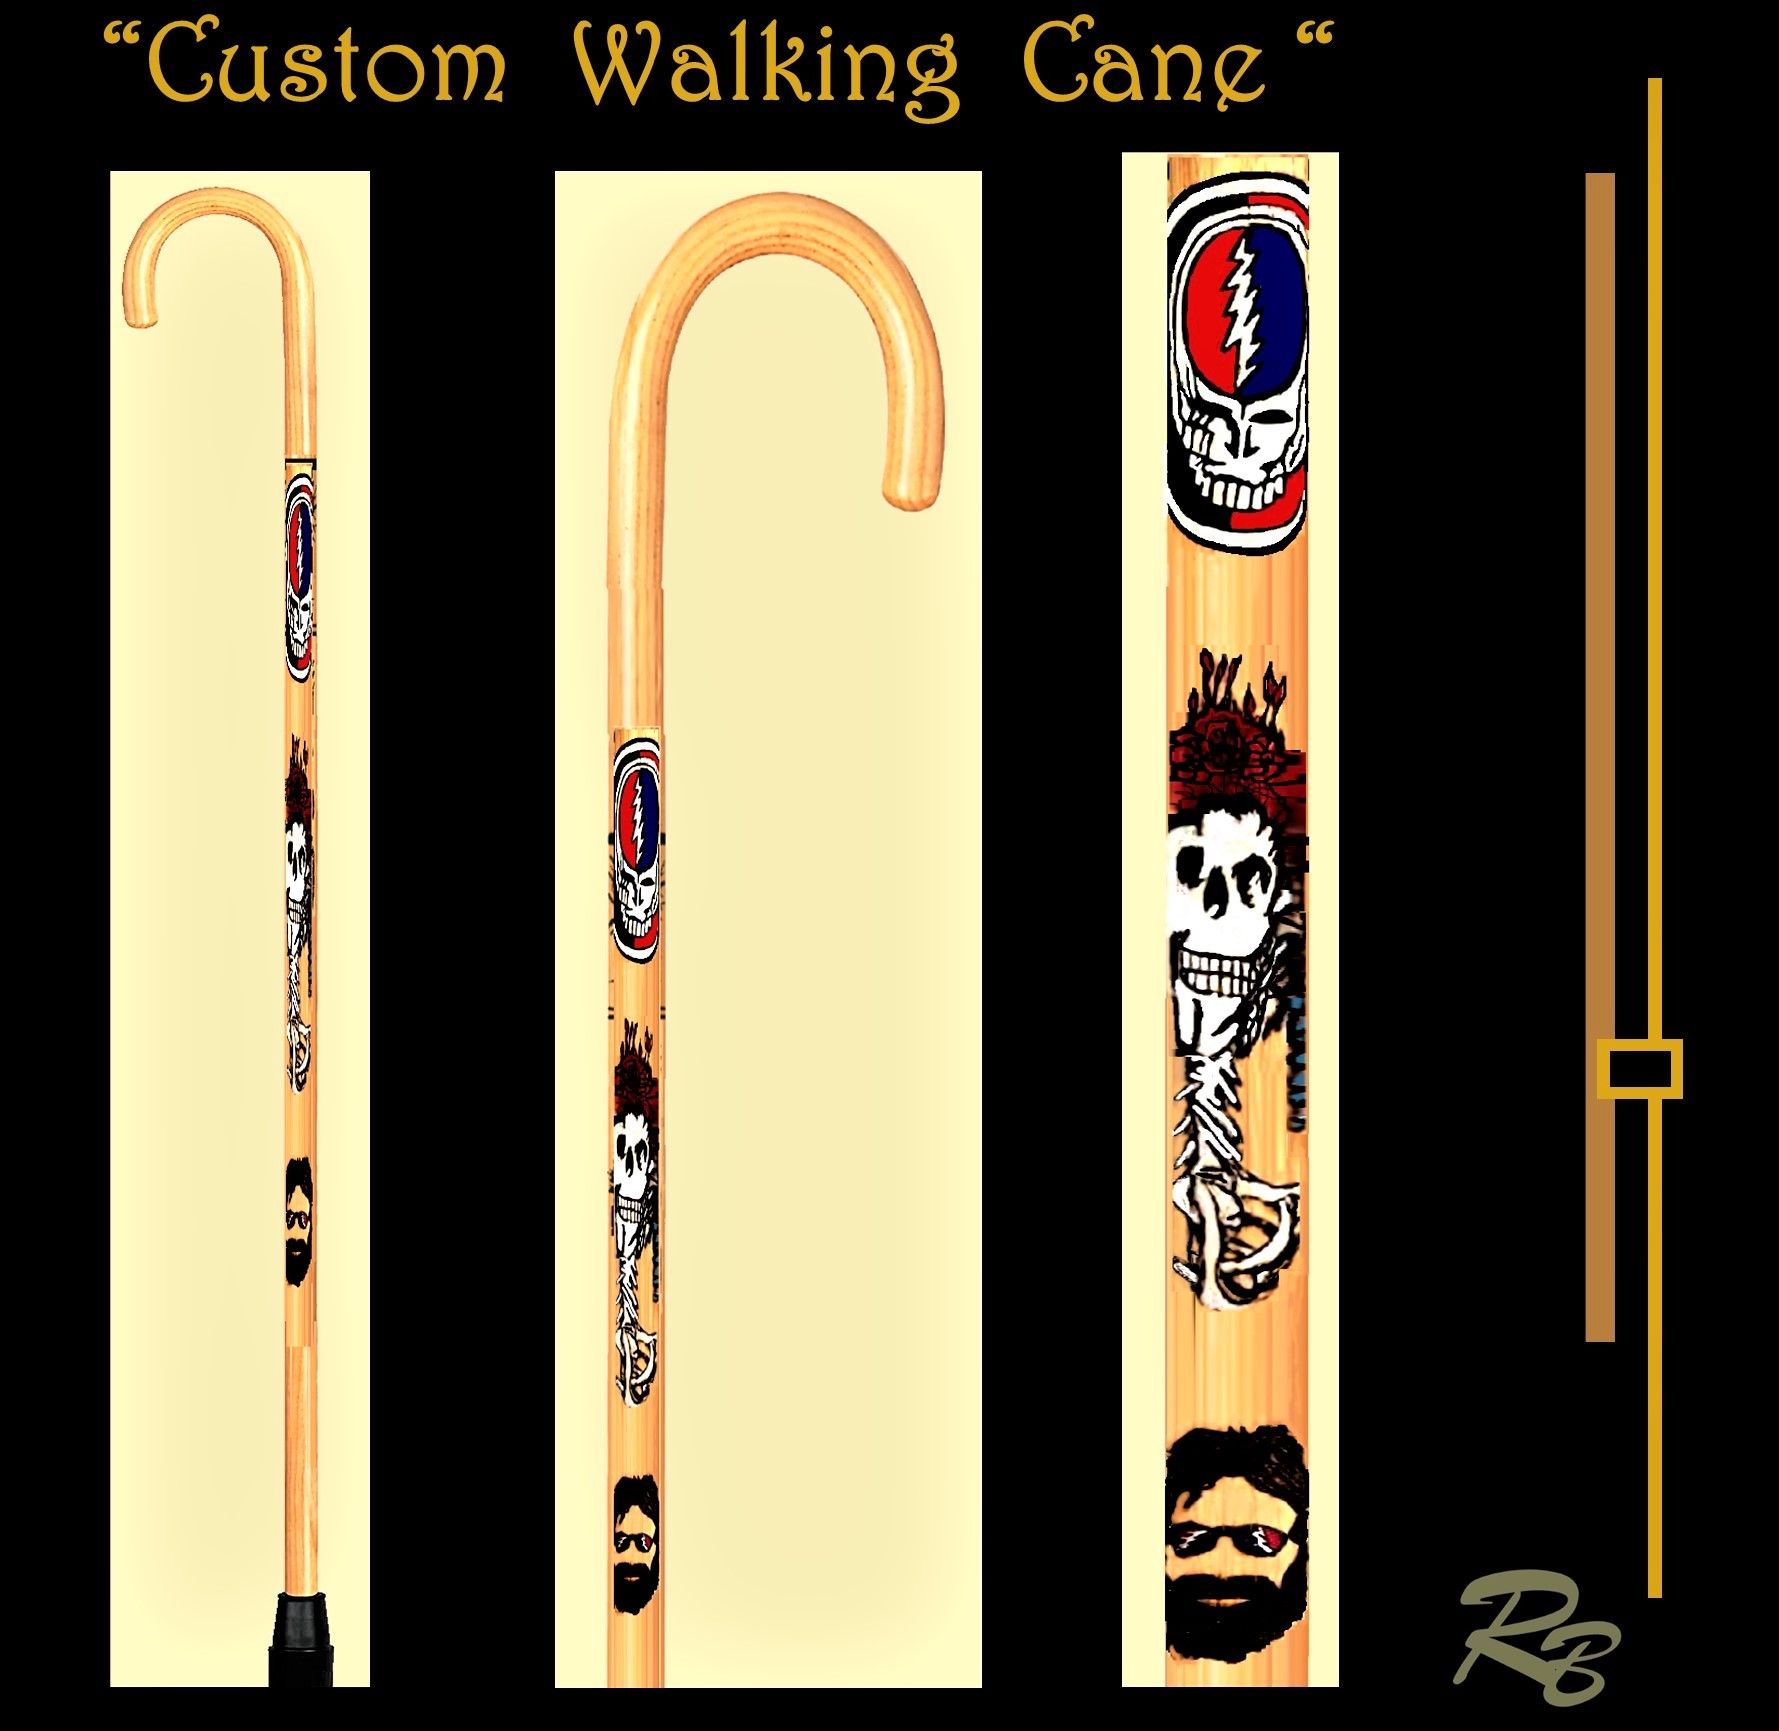 Custom Made Wood Anniversary,Retirement Gift,Hiking Stick,Walking Stick,Cane ,Hikers Gift by Artistic Creations By Rose